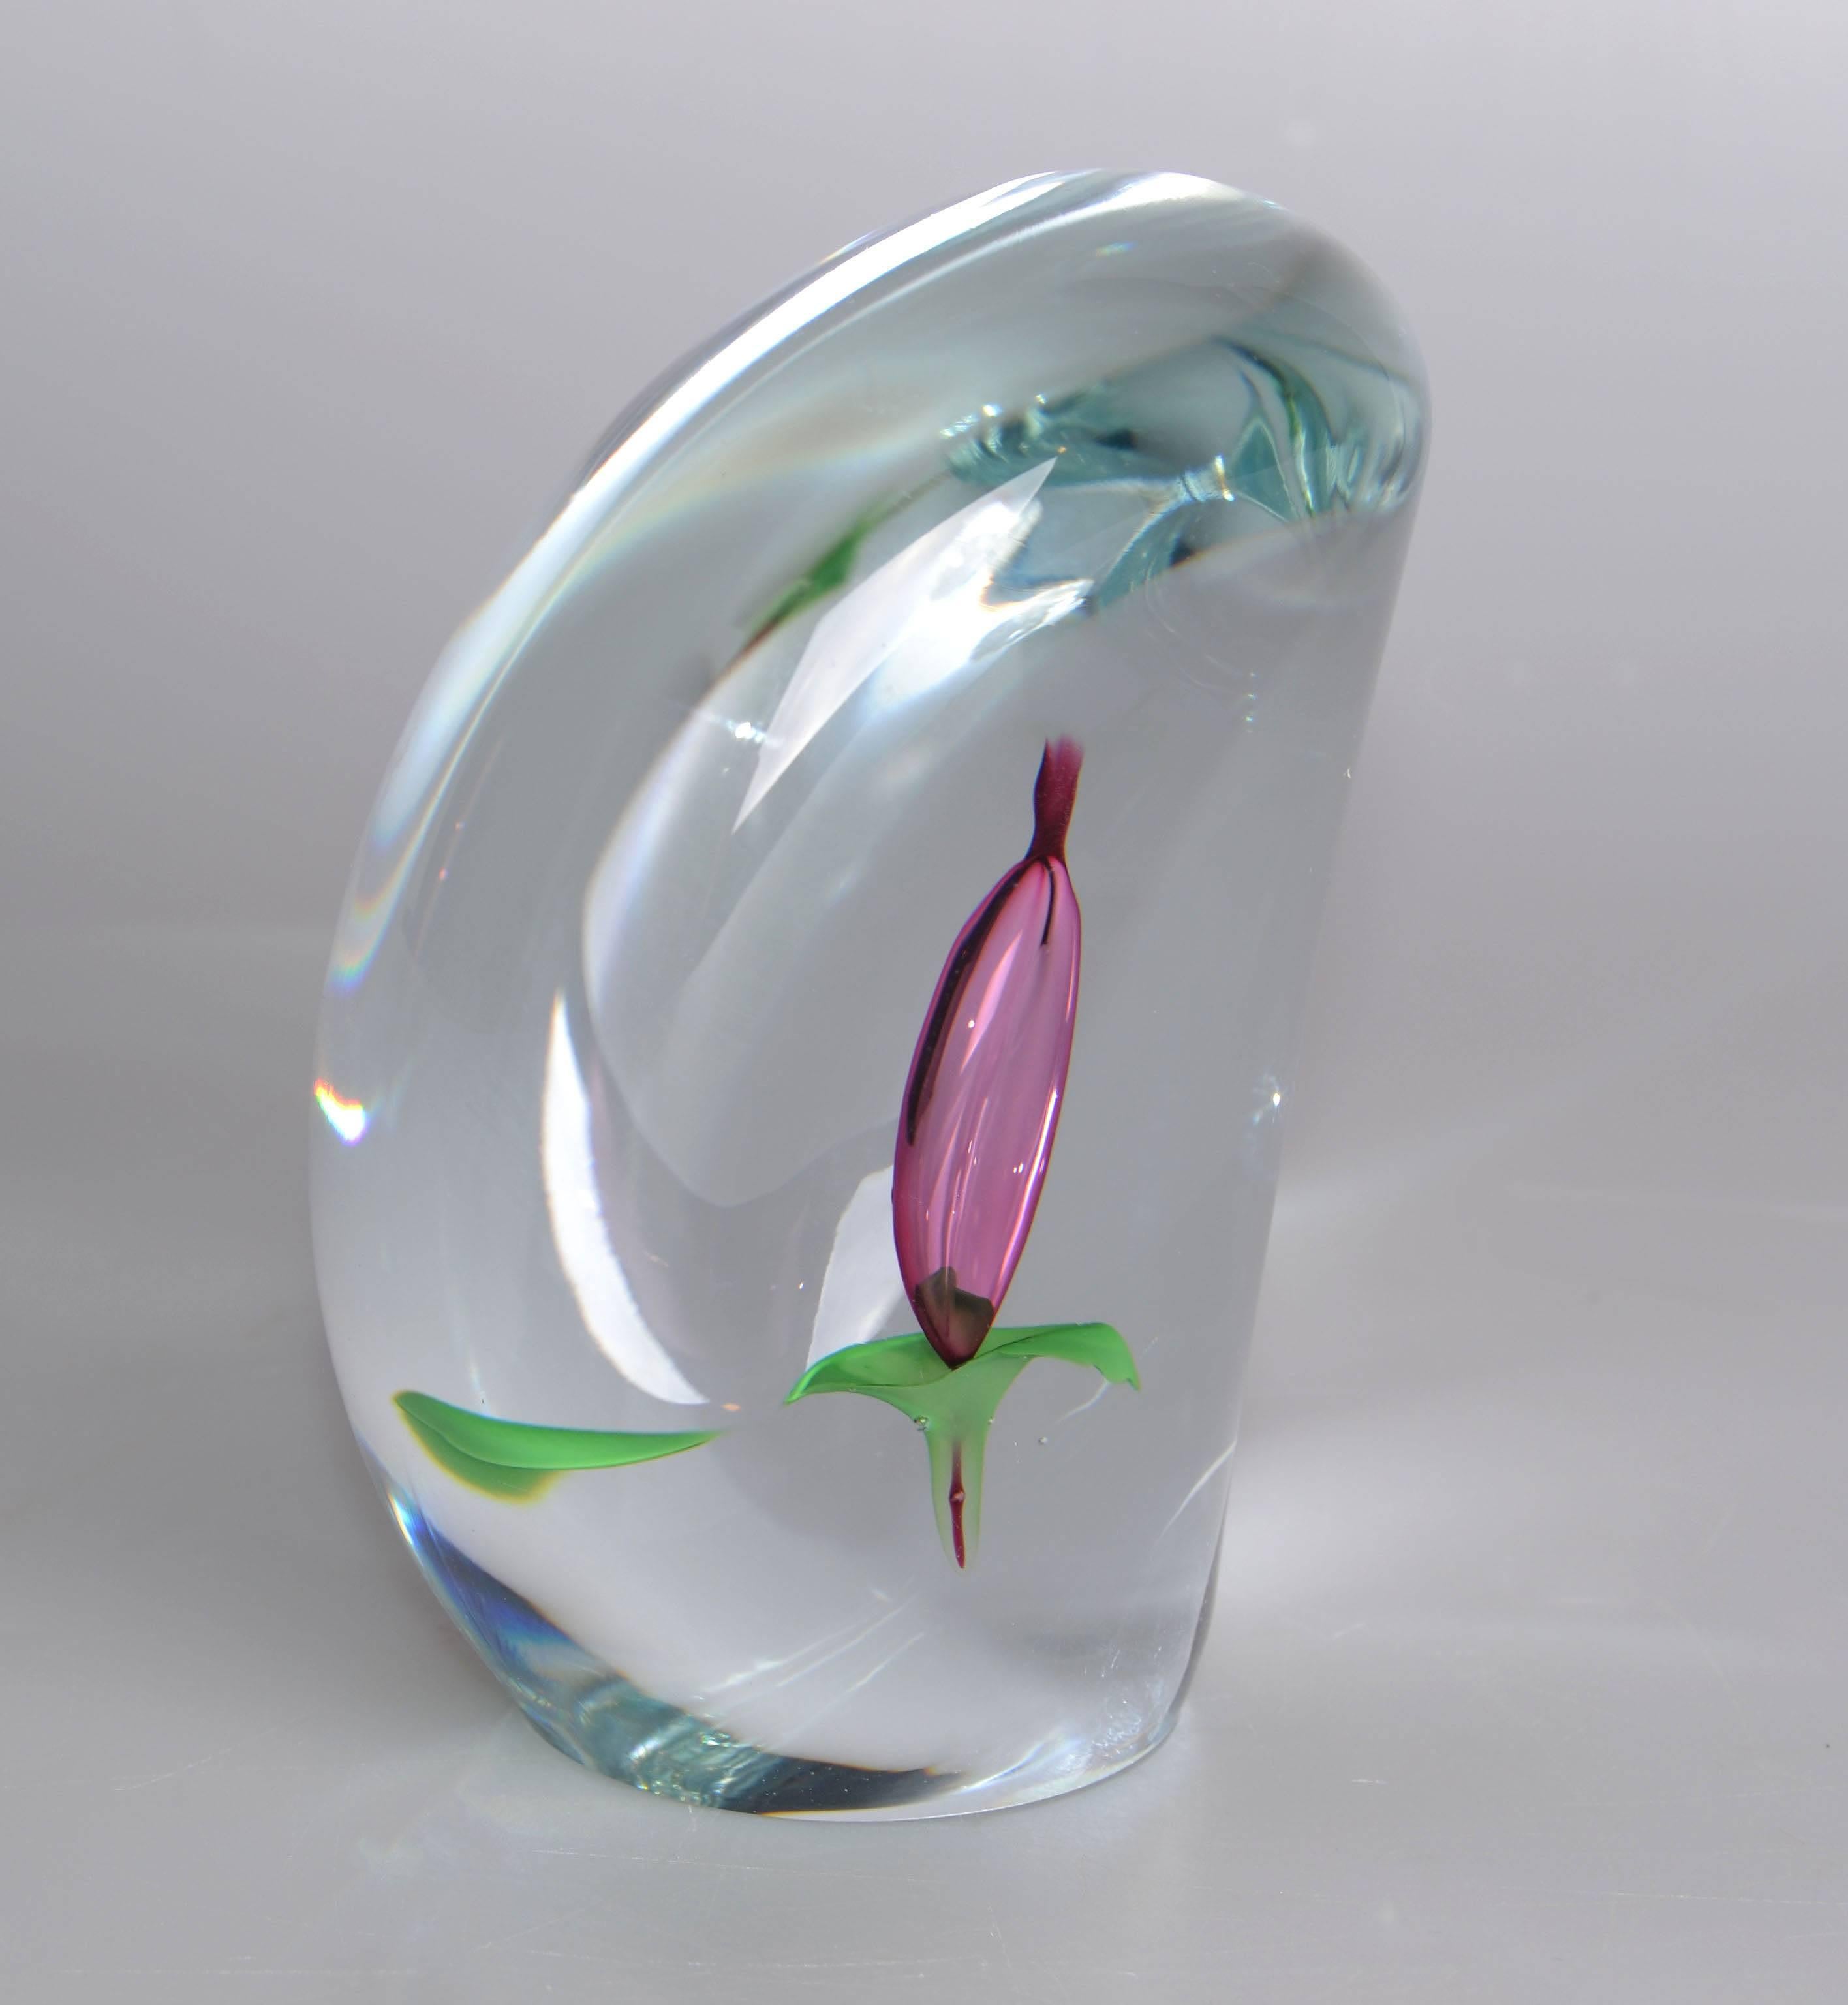 Original signed huge Beranek Floral Bohemian glass paperweight.
Signature underneath and the Label at the front bottom.
Highly collectible item.